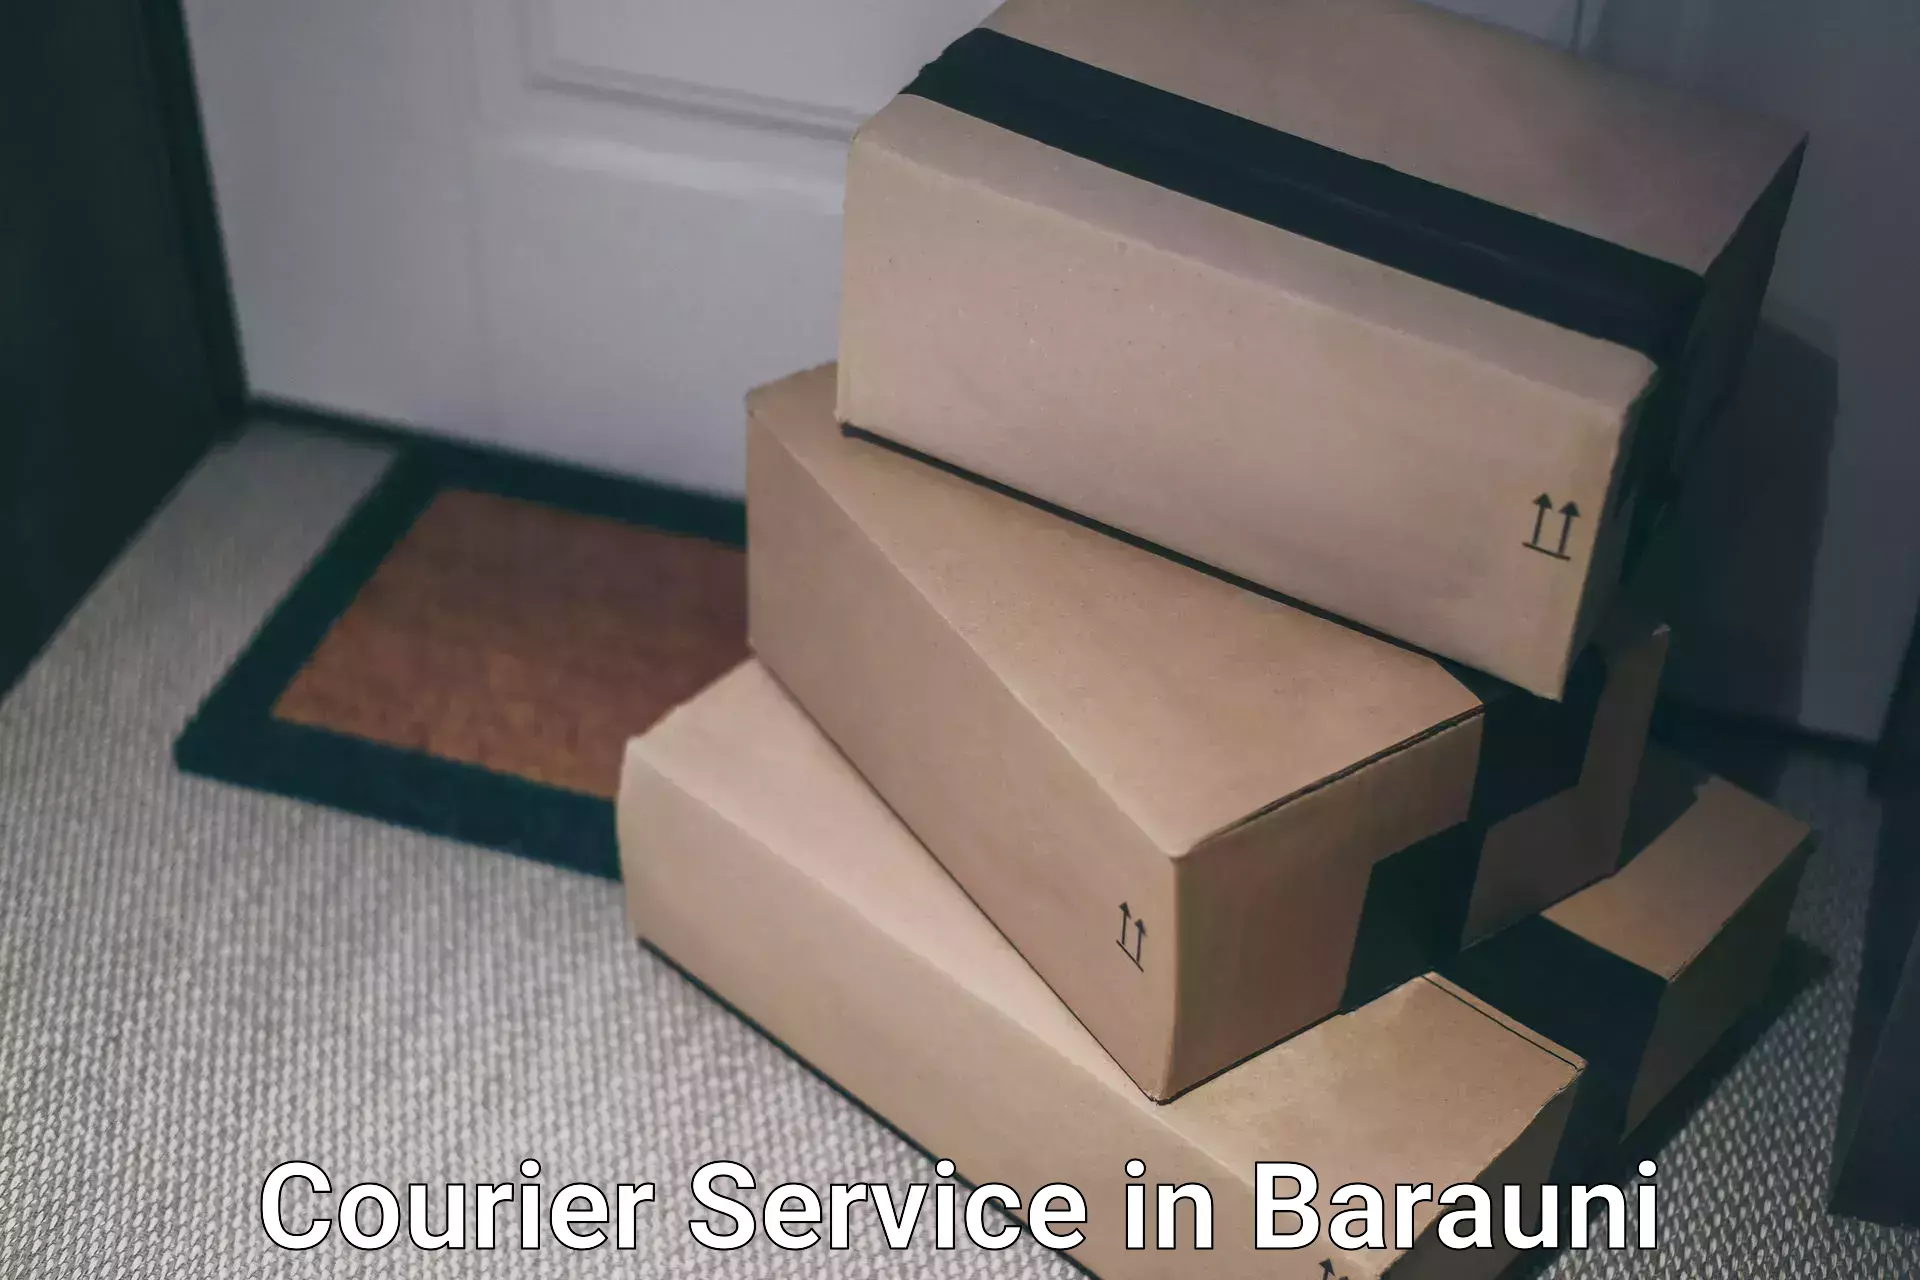 Advanced freight services in Barauni